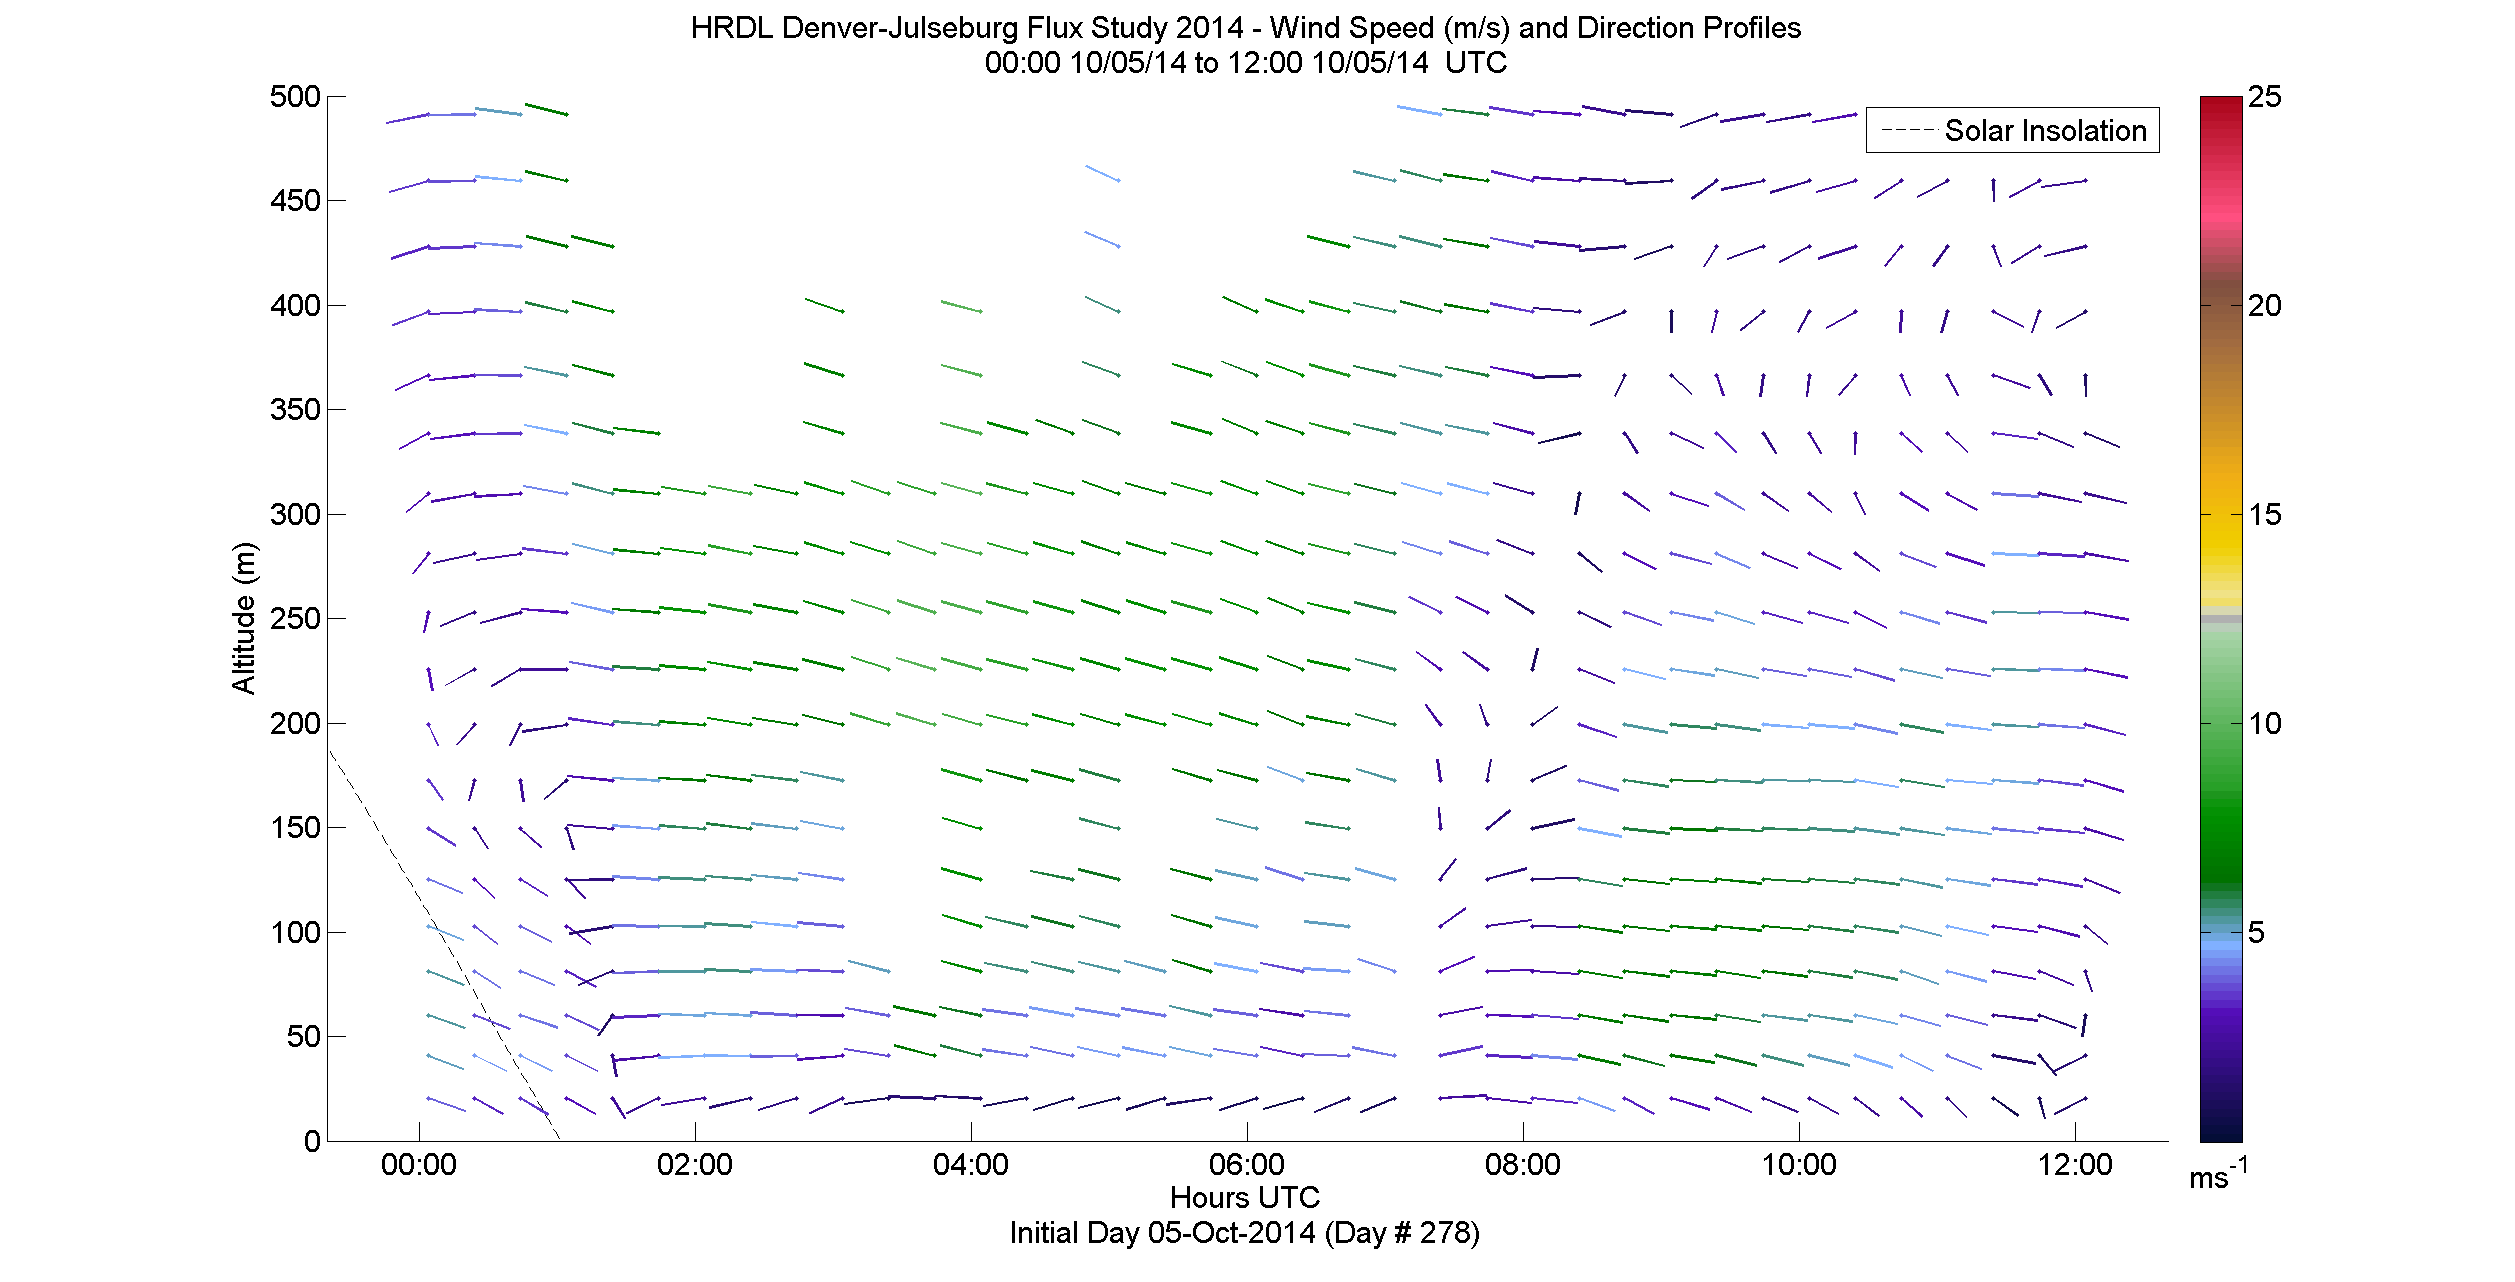 HRDL speed and direction profile - October 5 am